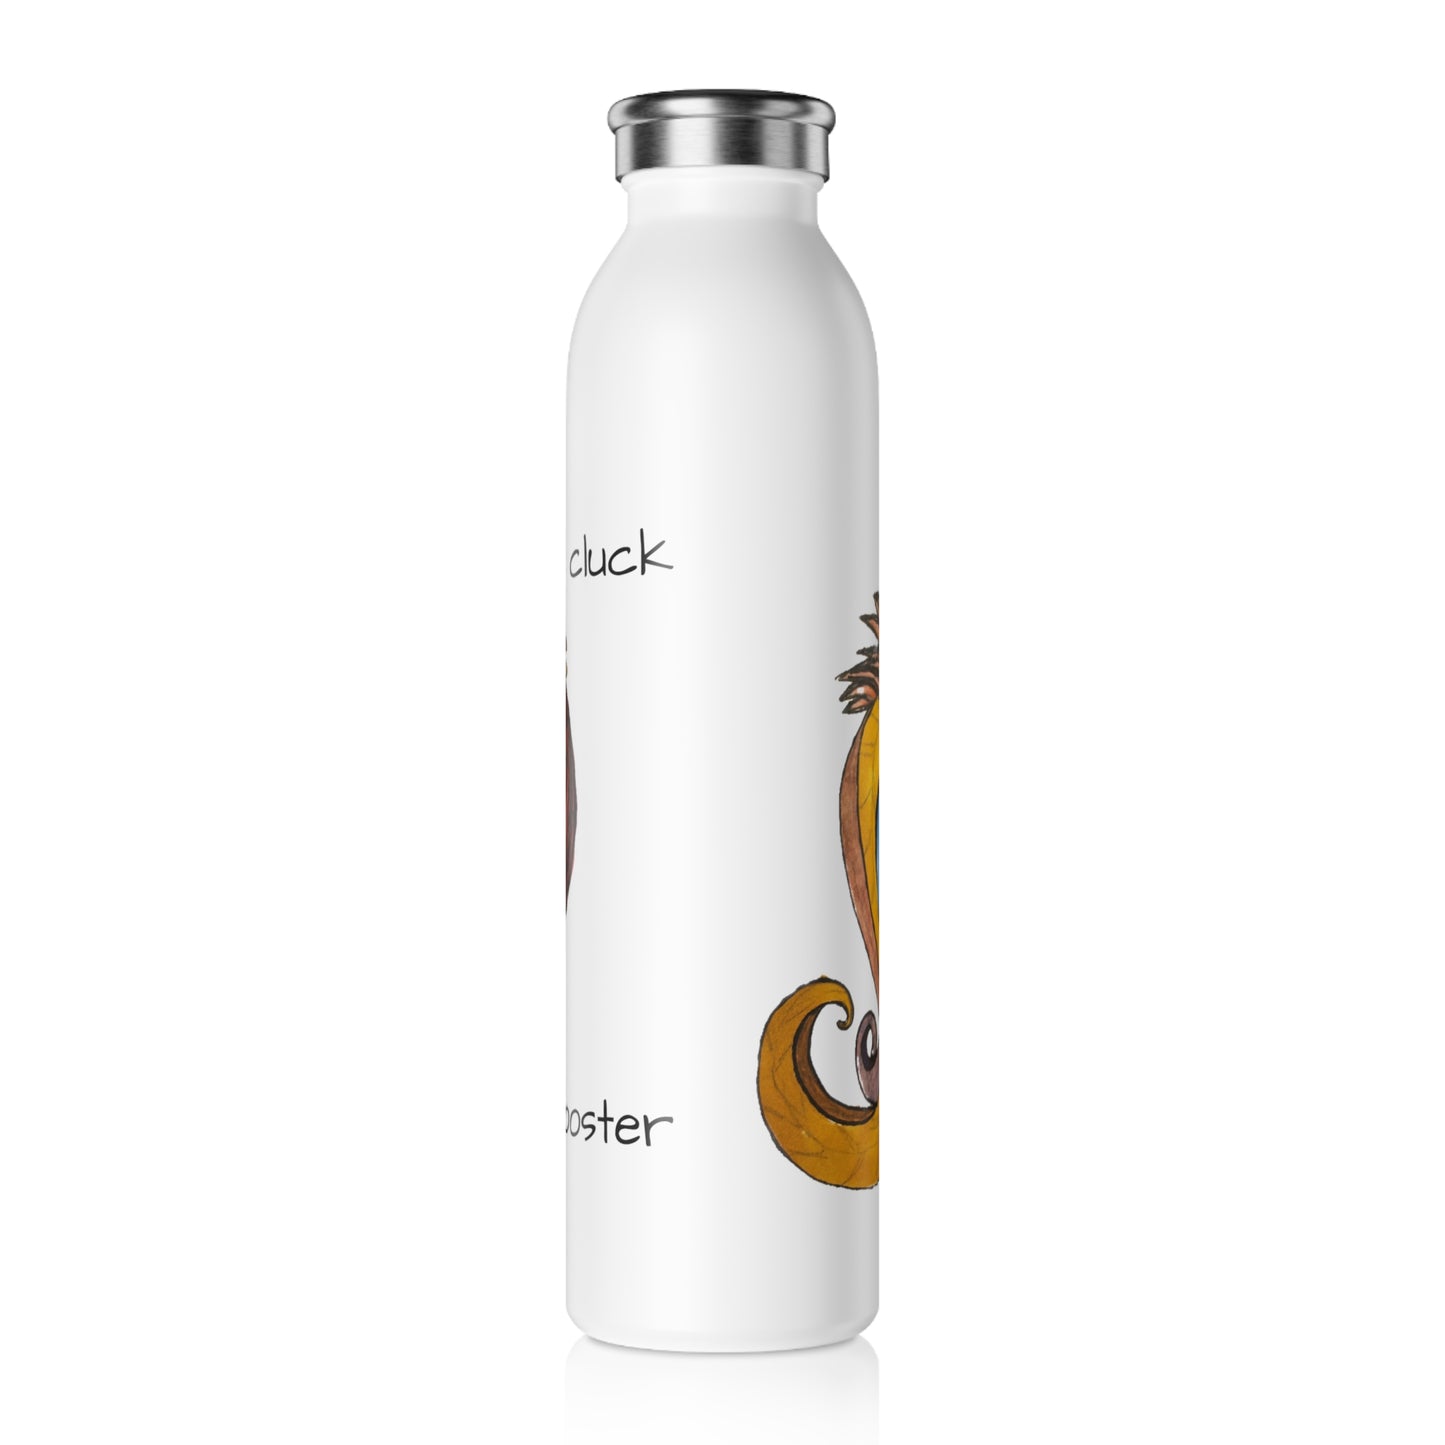 Signed Rooster™ clucking quotes Slim Water Bottle "what the cluck"